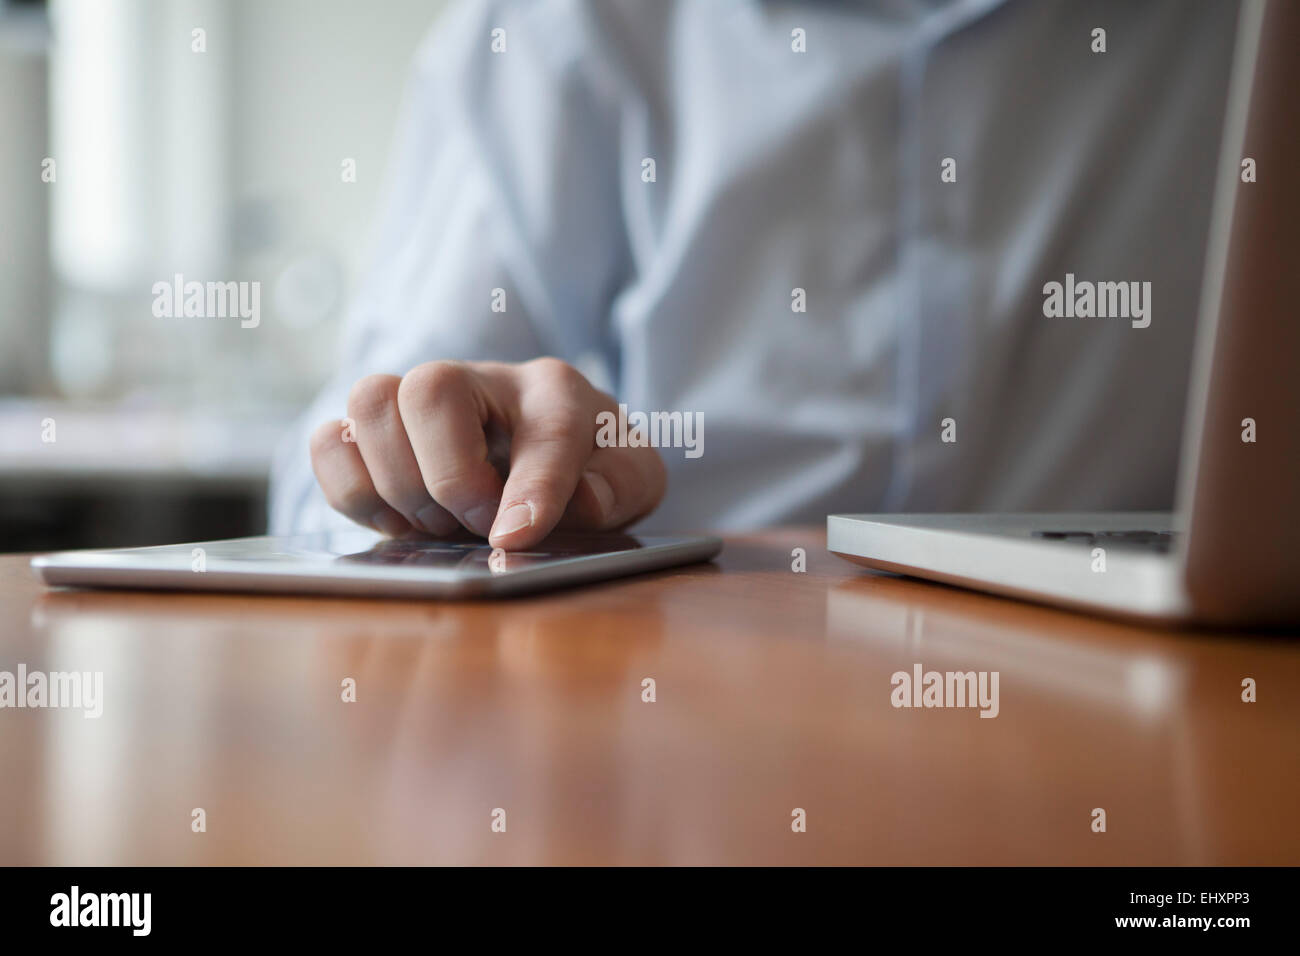 Man's hand typing on touch screen of digital tablet Stock Photo